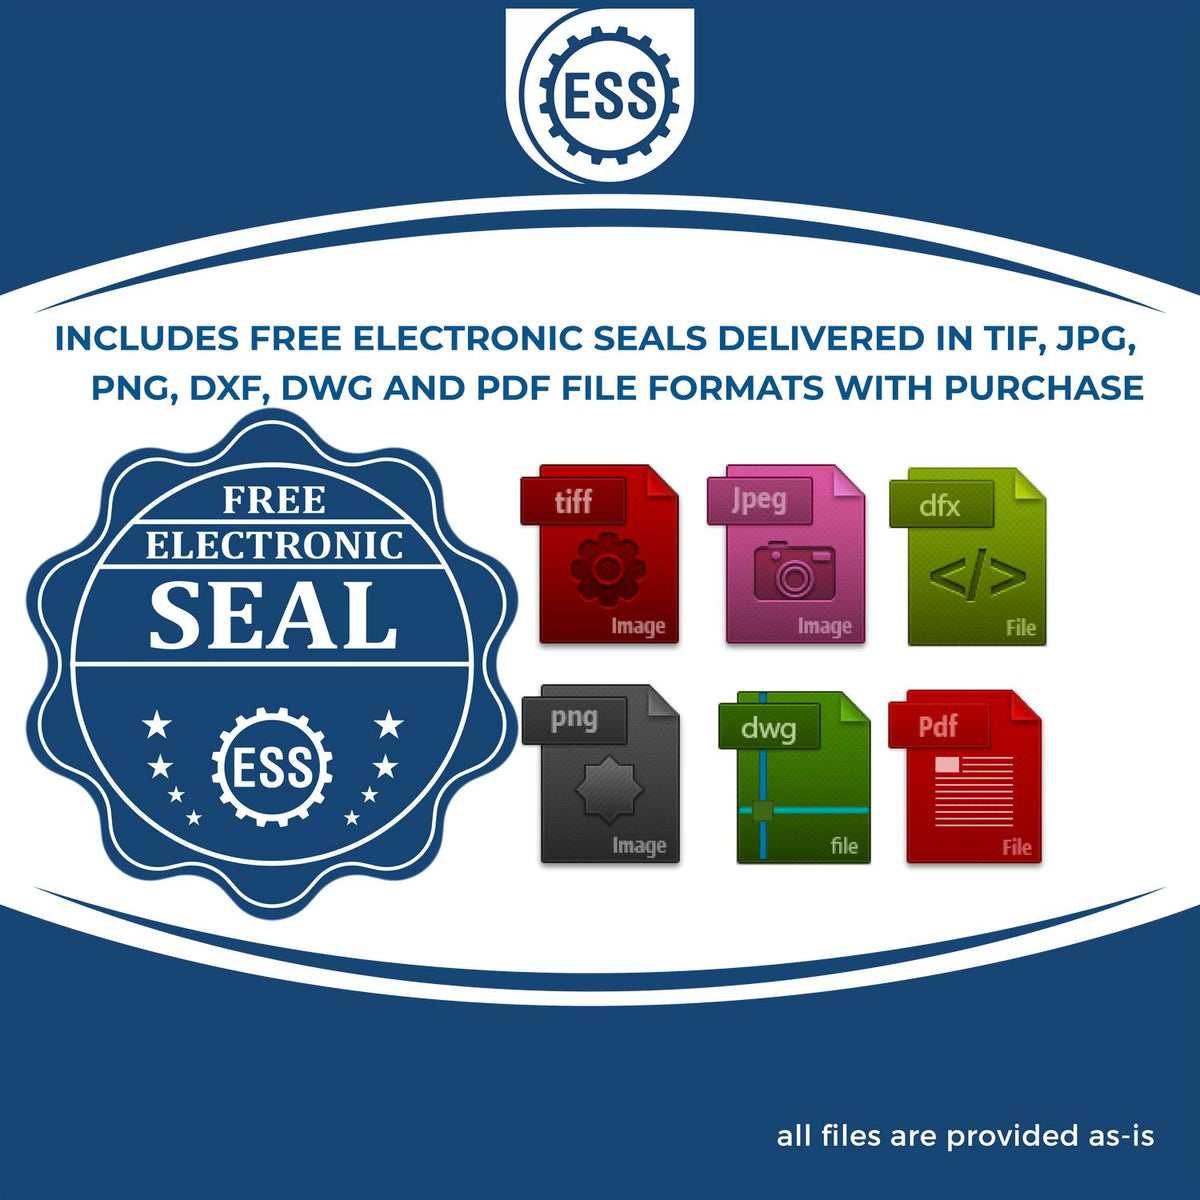 An infographic for the free electronic seal for the Hybrid Virginia Engineer Seal illustrating the different file type icons such as DXF, DWG, TIF, JPG and PNG.